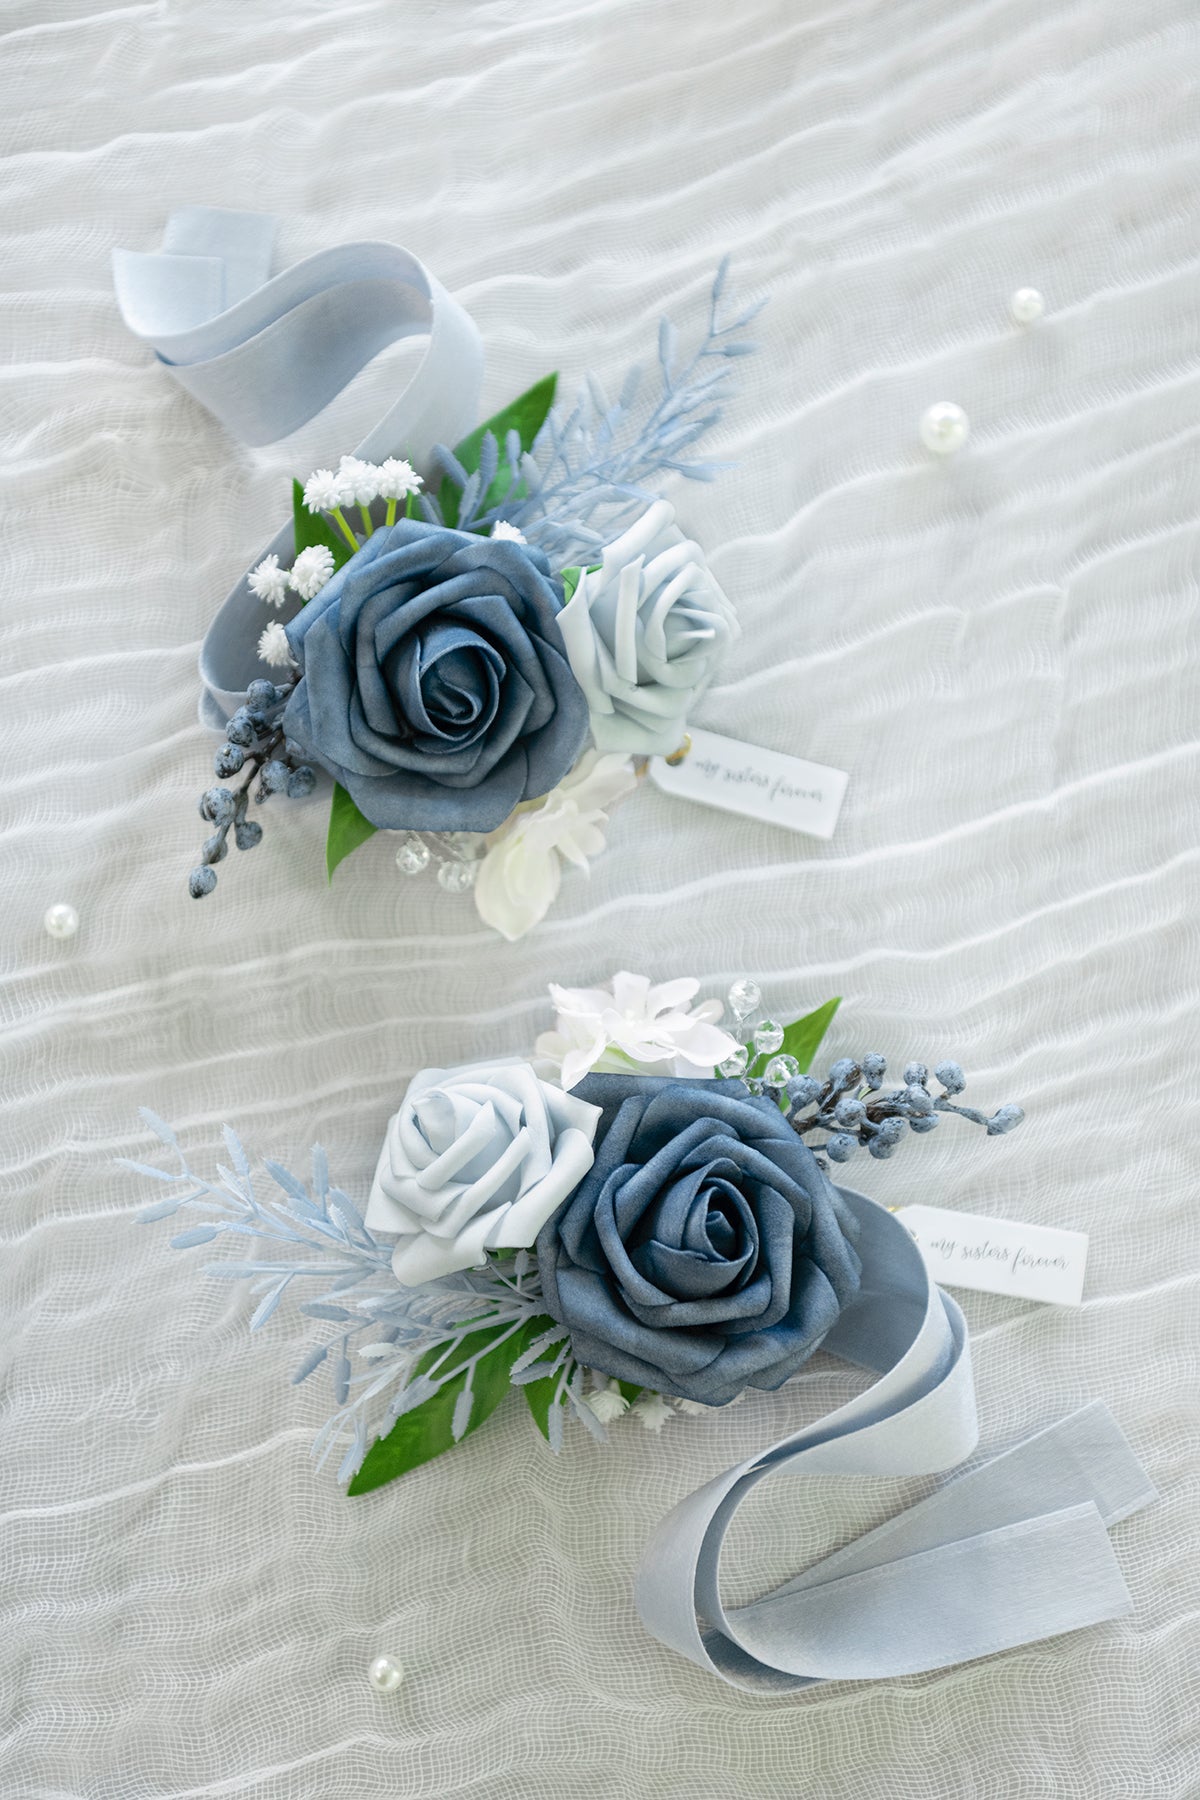 Wrist Corsages in Romantic Dusty Blue